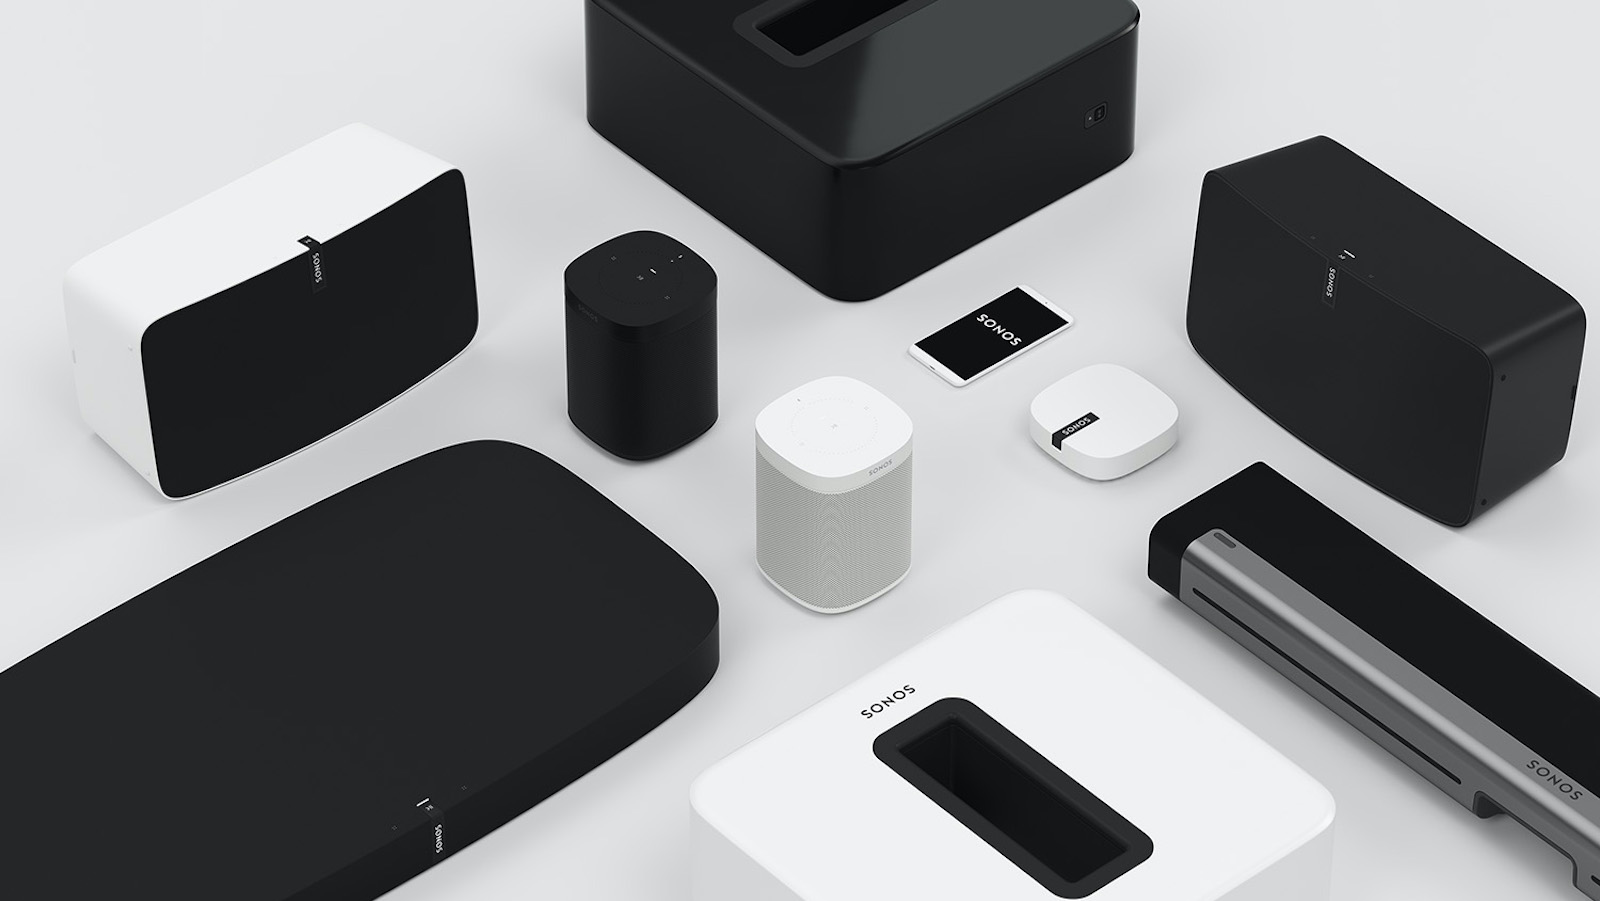 Find tips on setting up and optimizing your Sonos system
Discover seamless integration with popular music streaming services